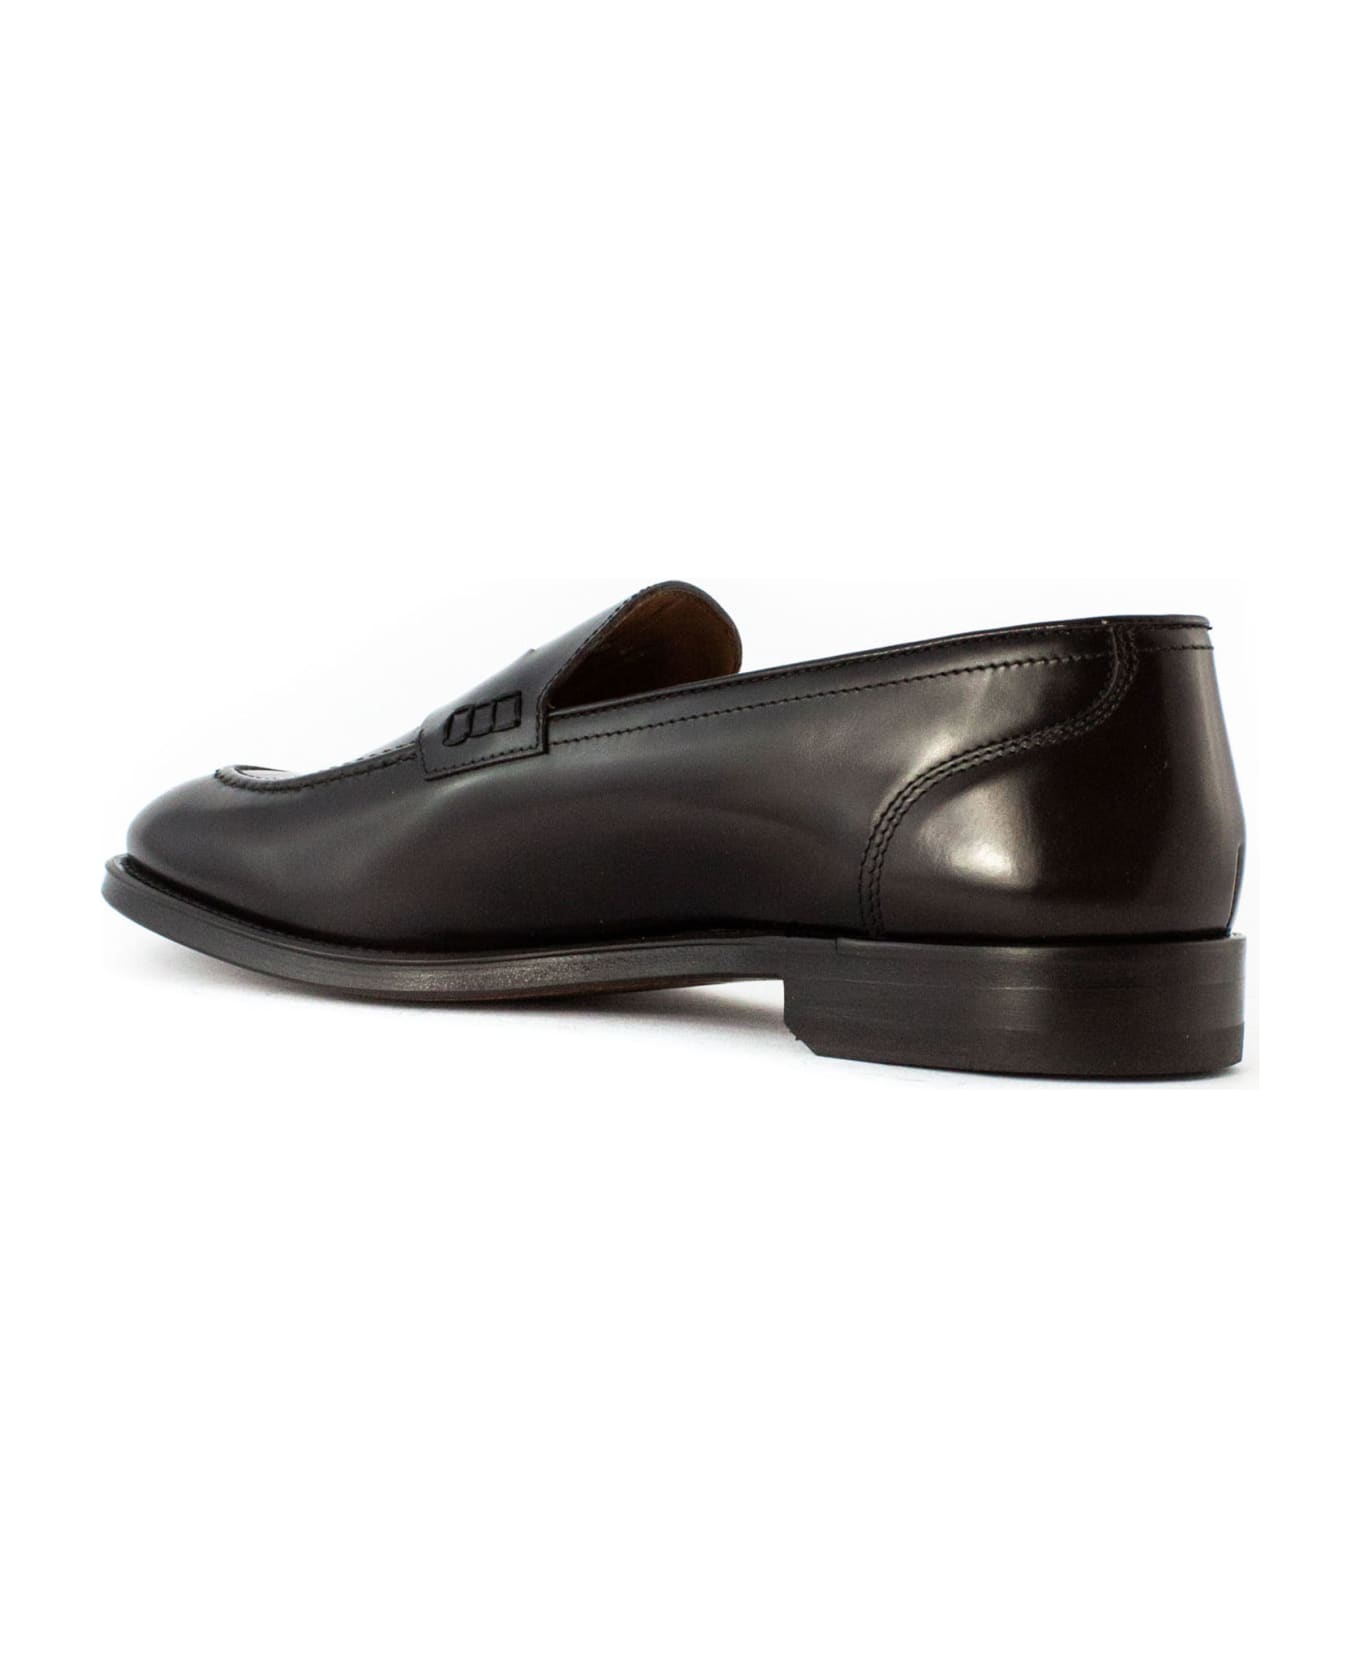 Doucal's Penny Loafer In Dark Brown Leather - Brown